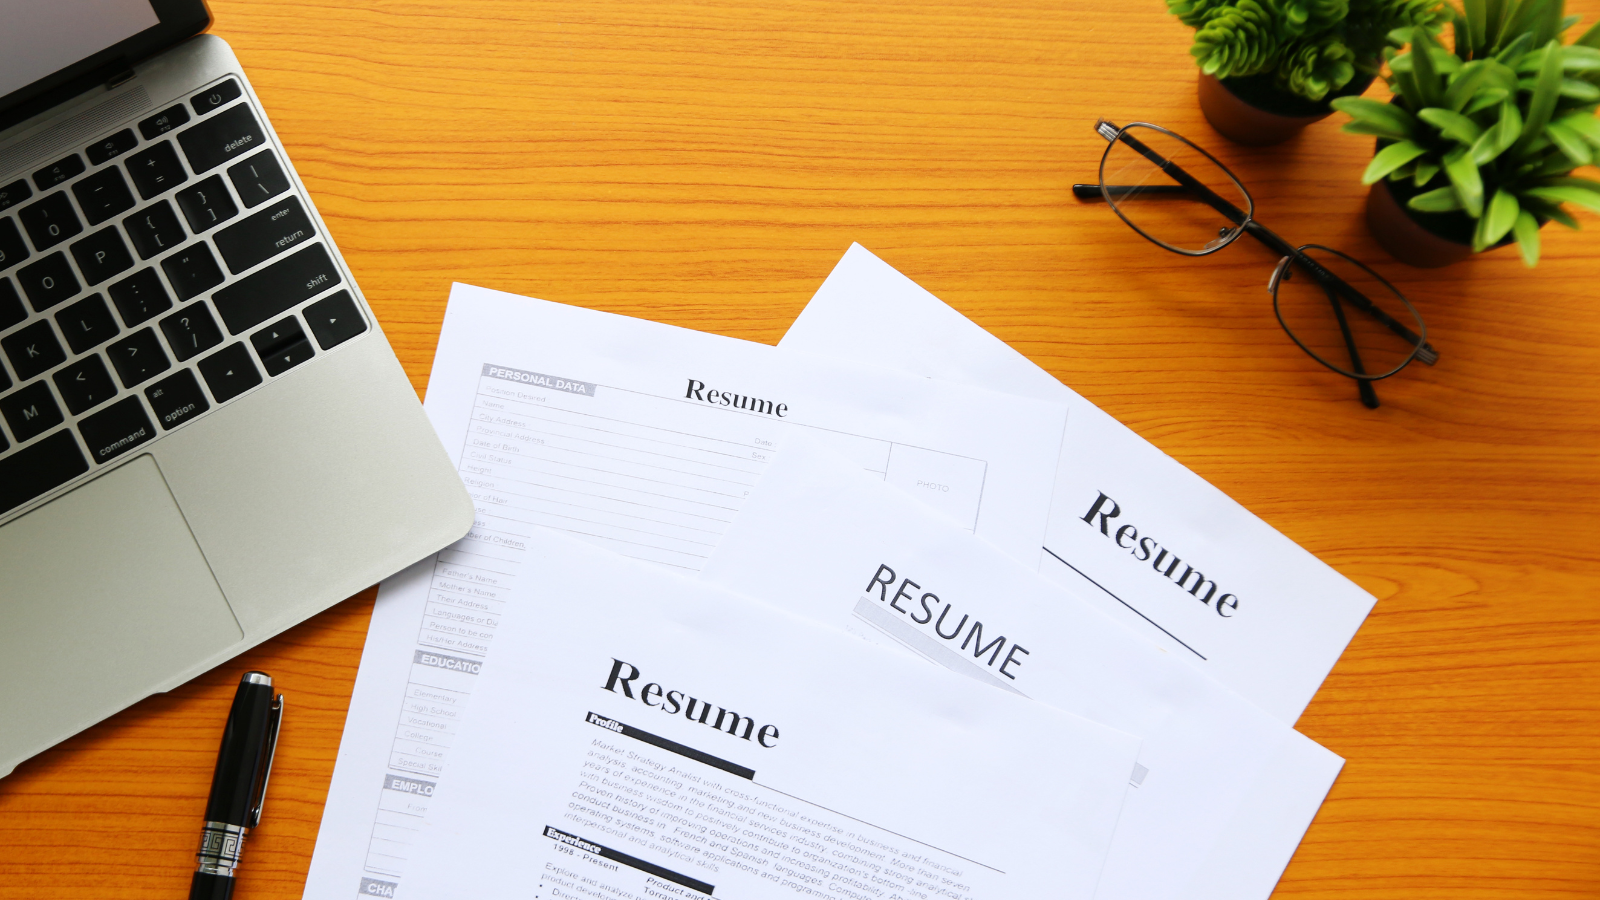 How to Write a Resume for Digital Marketing Jobs?